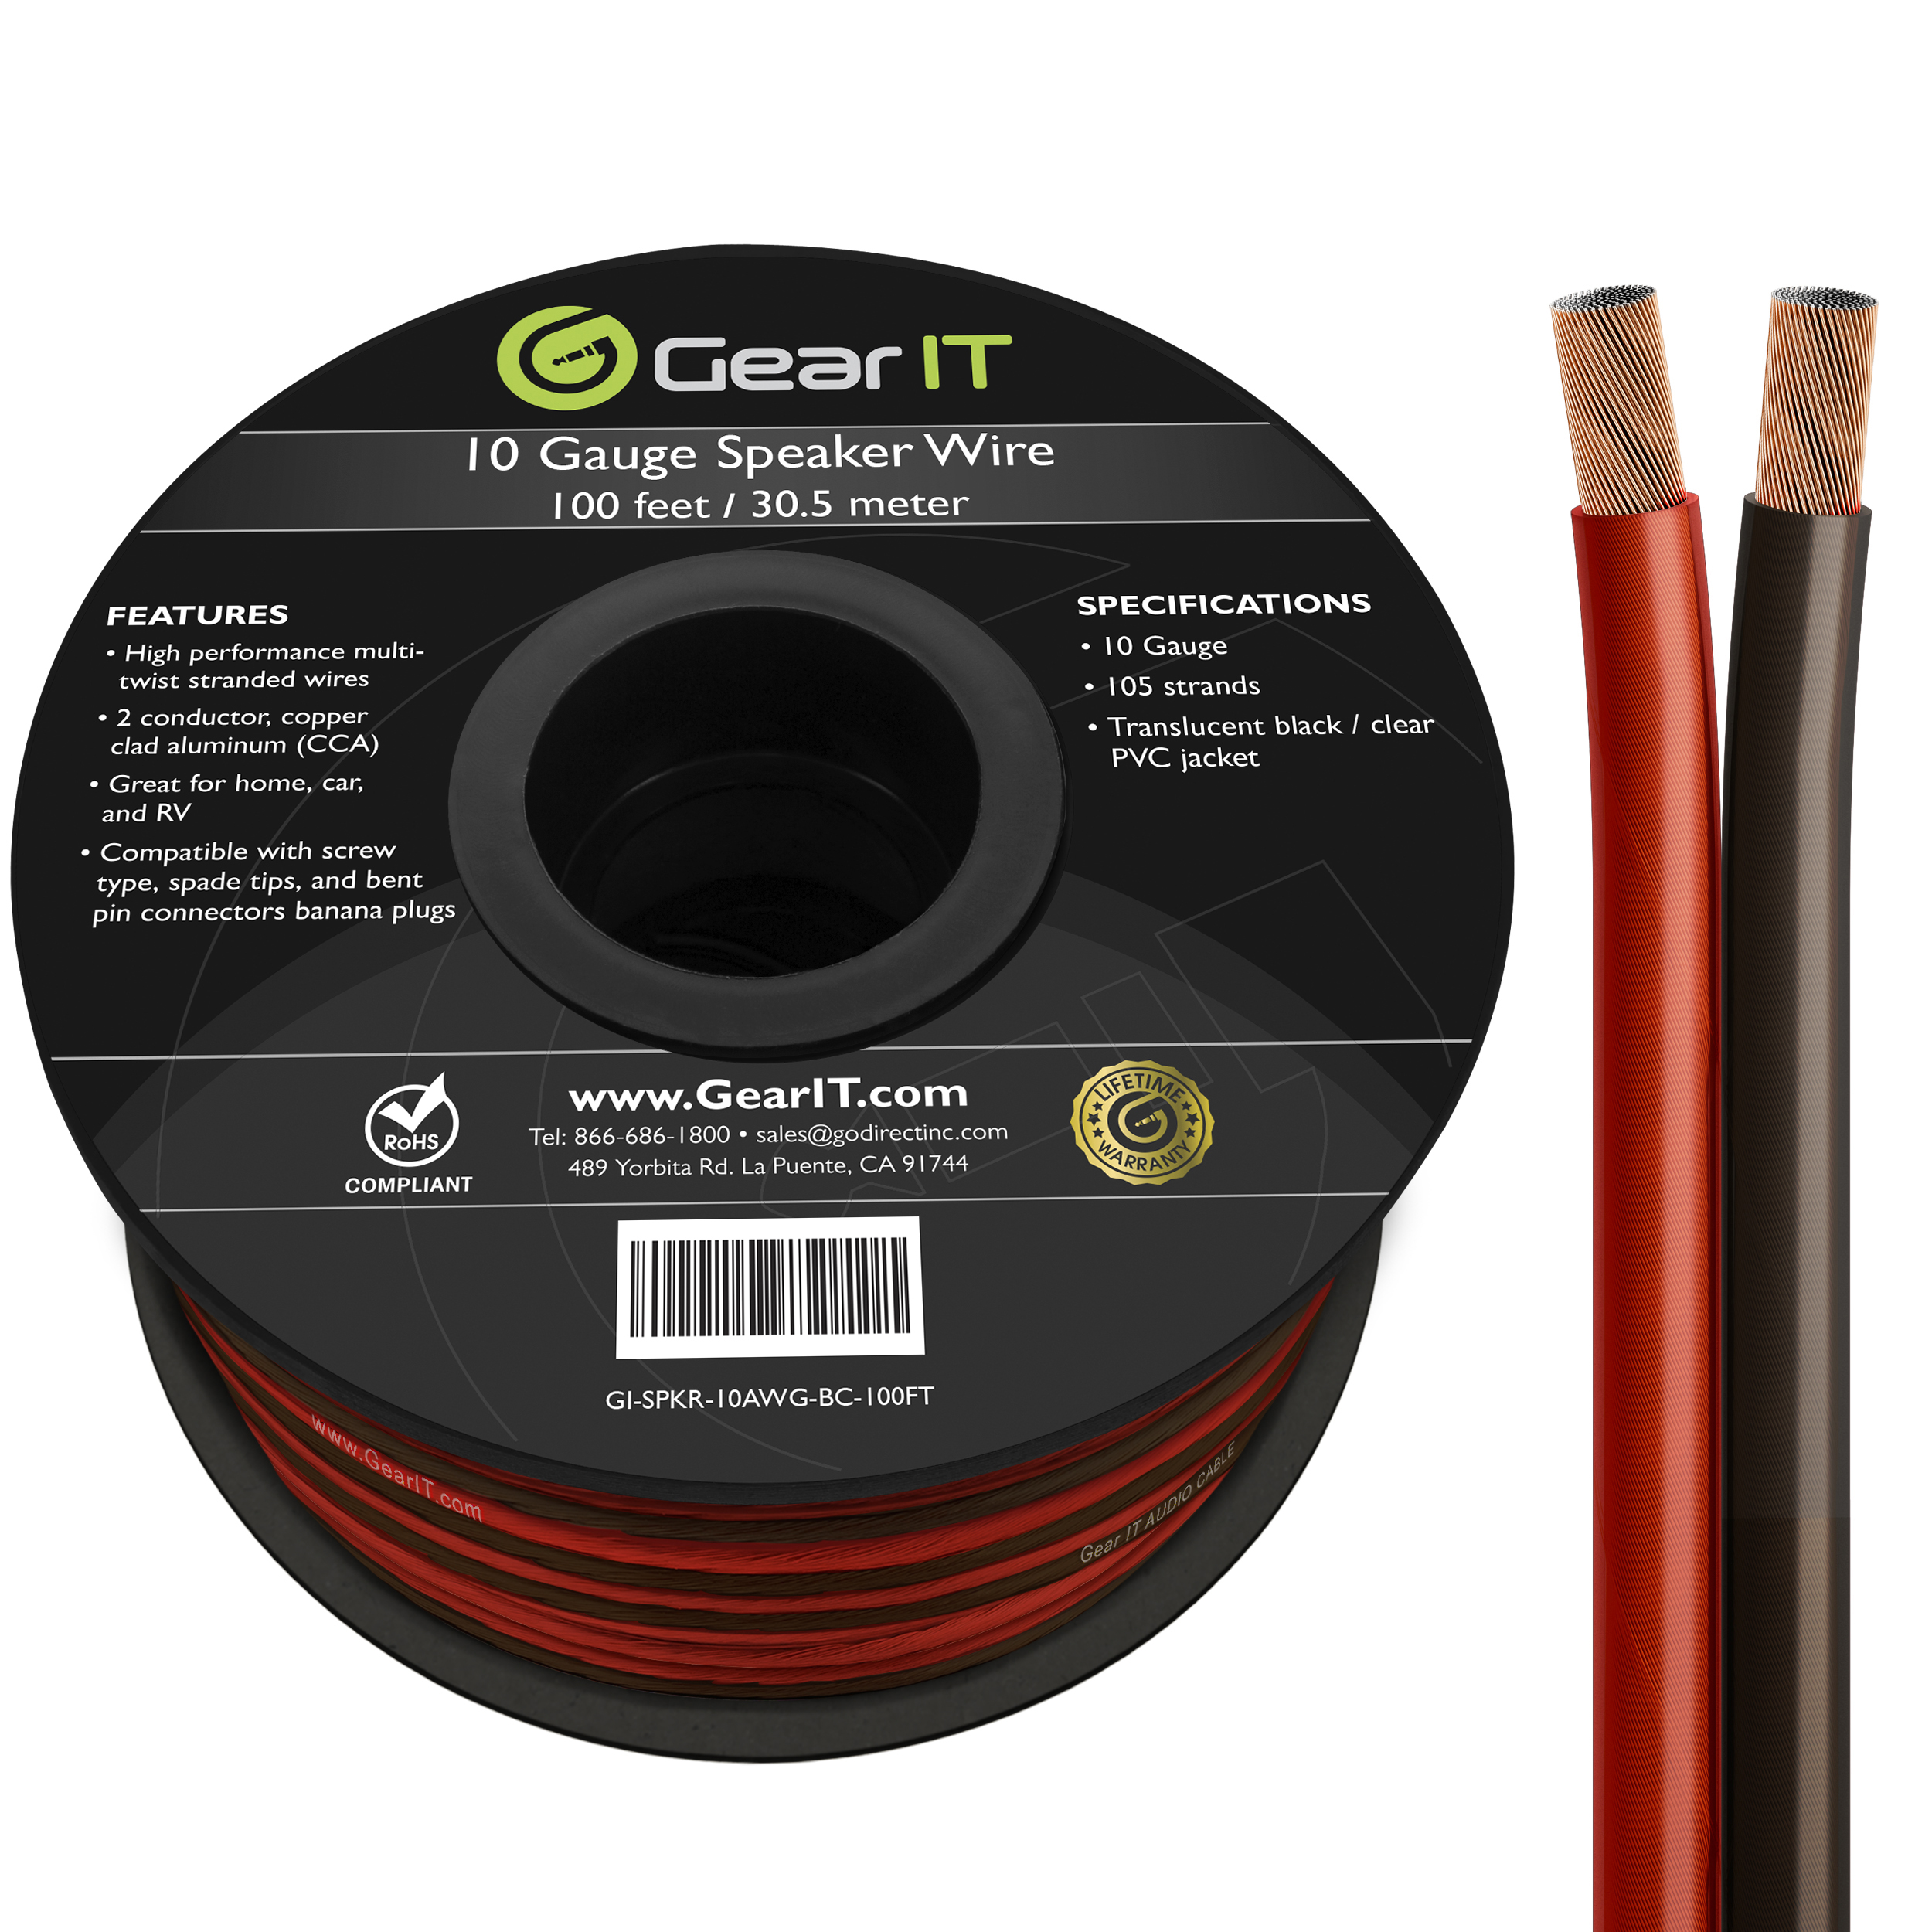 GearIT 10 Gauge Speaker Wire (100 Feet), Copper Clad Aluminum, CCA Thick Gauge Copper Wire for Stereo, Surround Sound, Home Theater, Radio (Black/Red, 100 Feet) - image 1 of 8